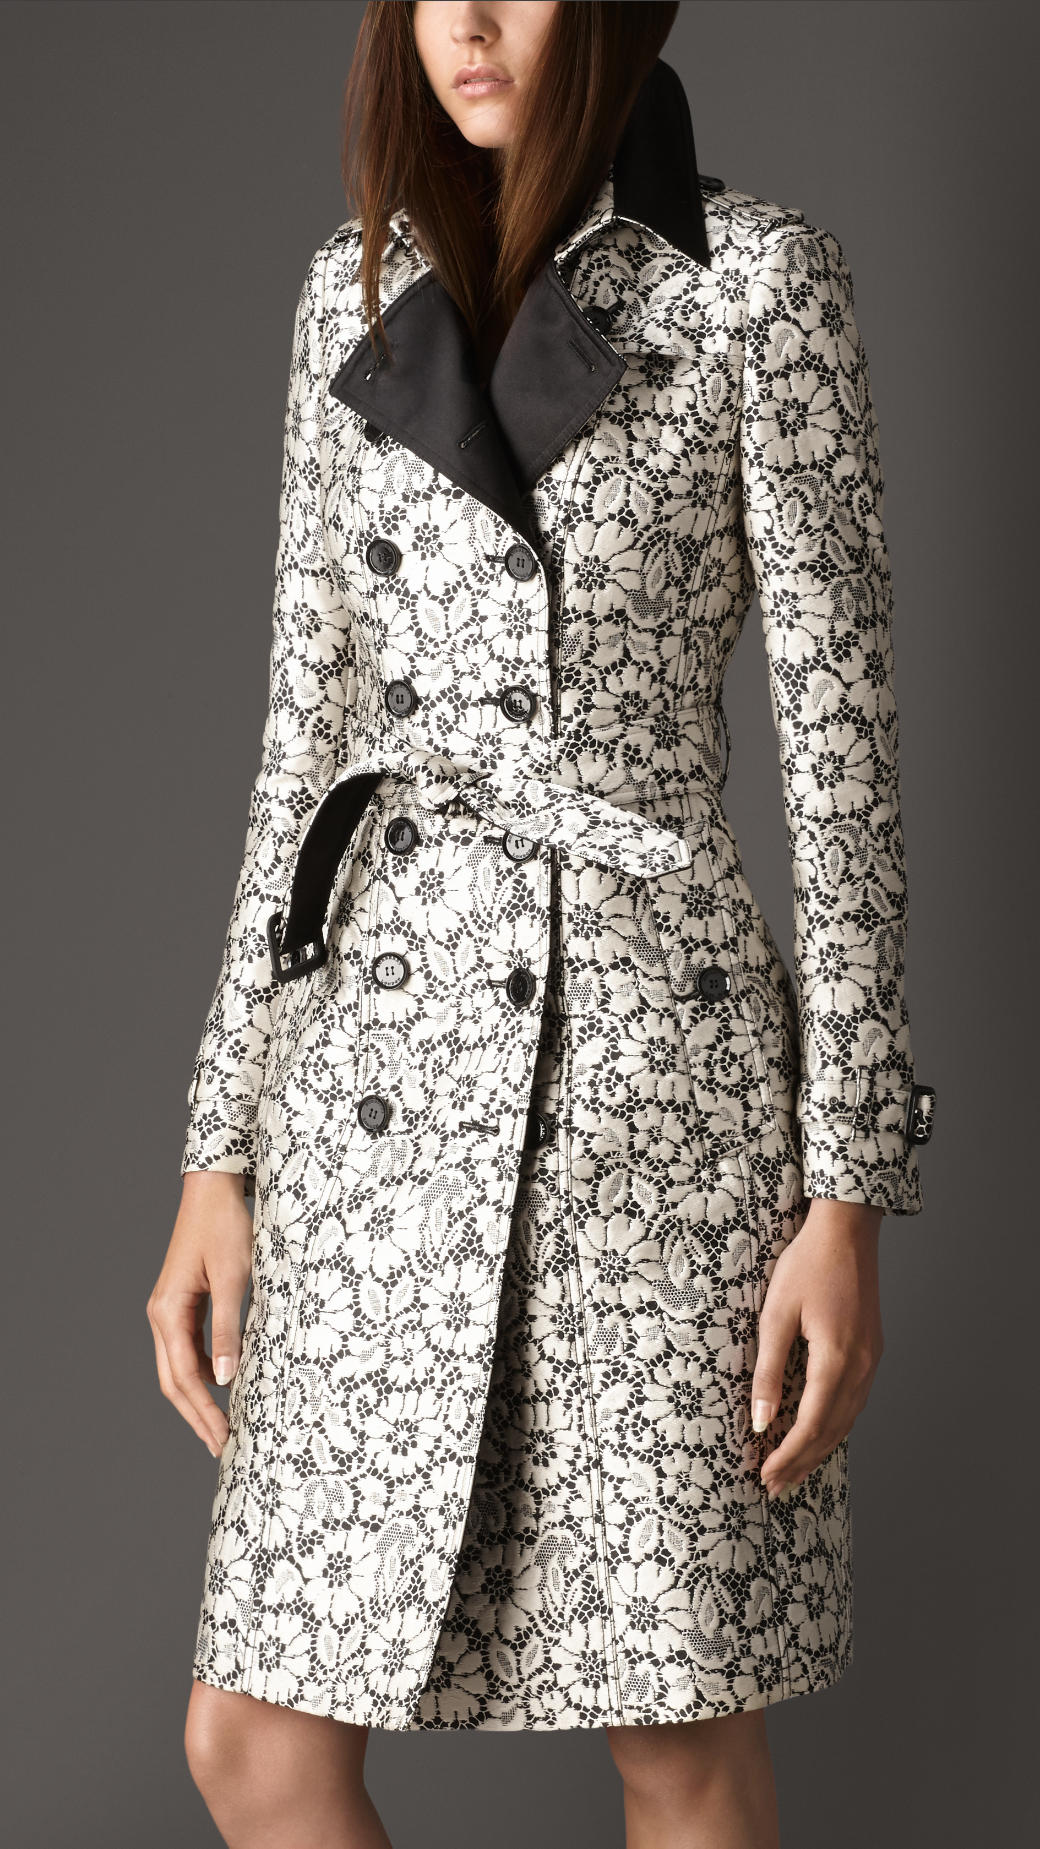 Lyst - Burberry Long Lace Jacquard Trench Coat in Black